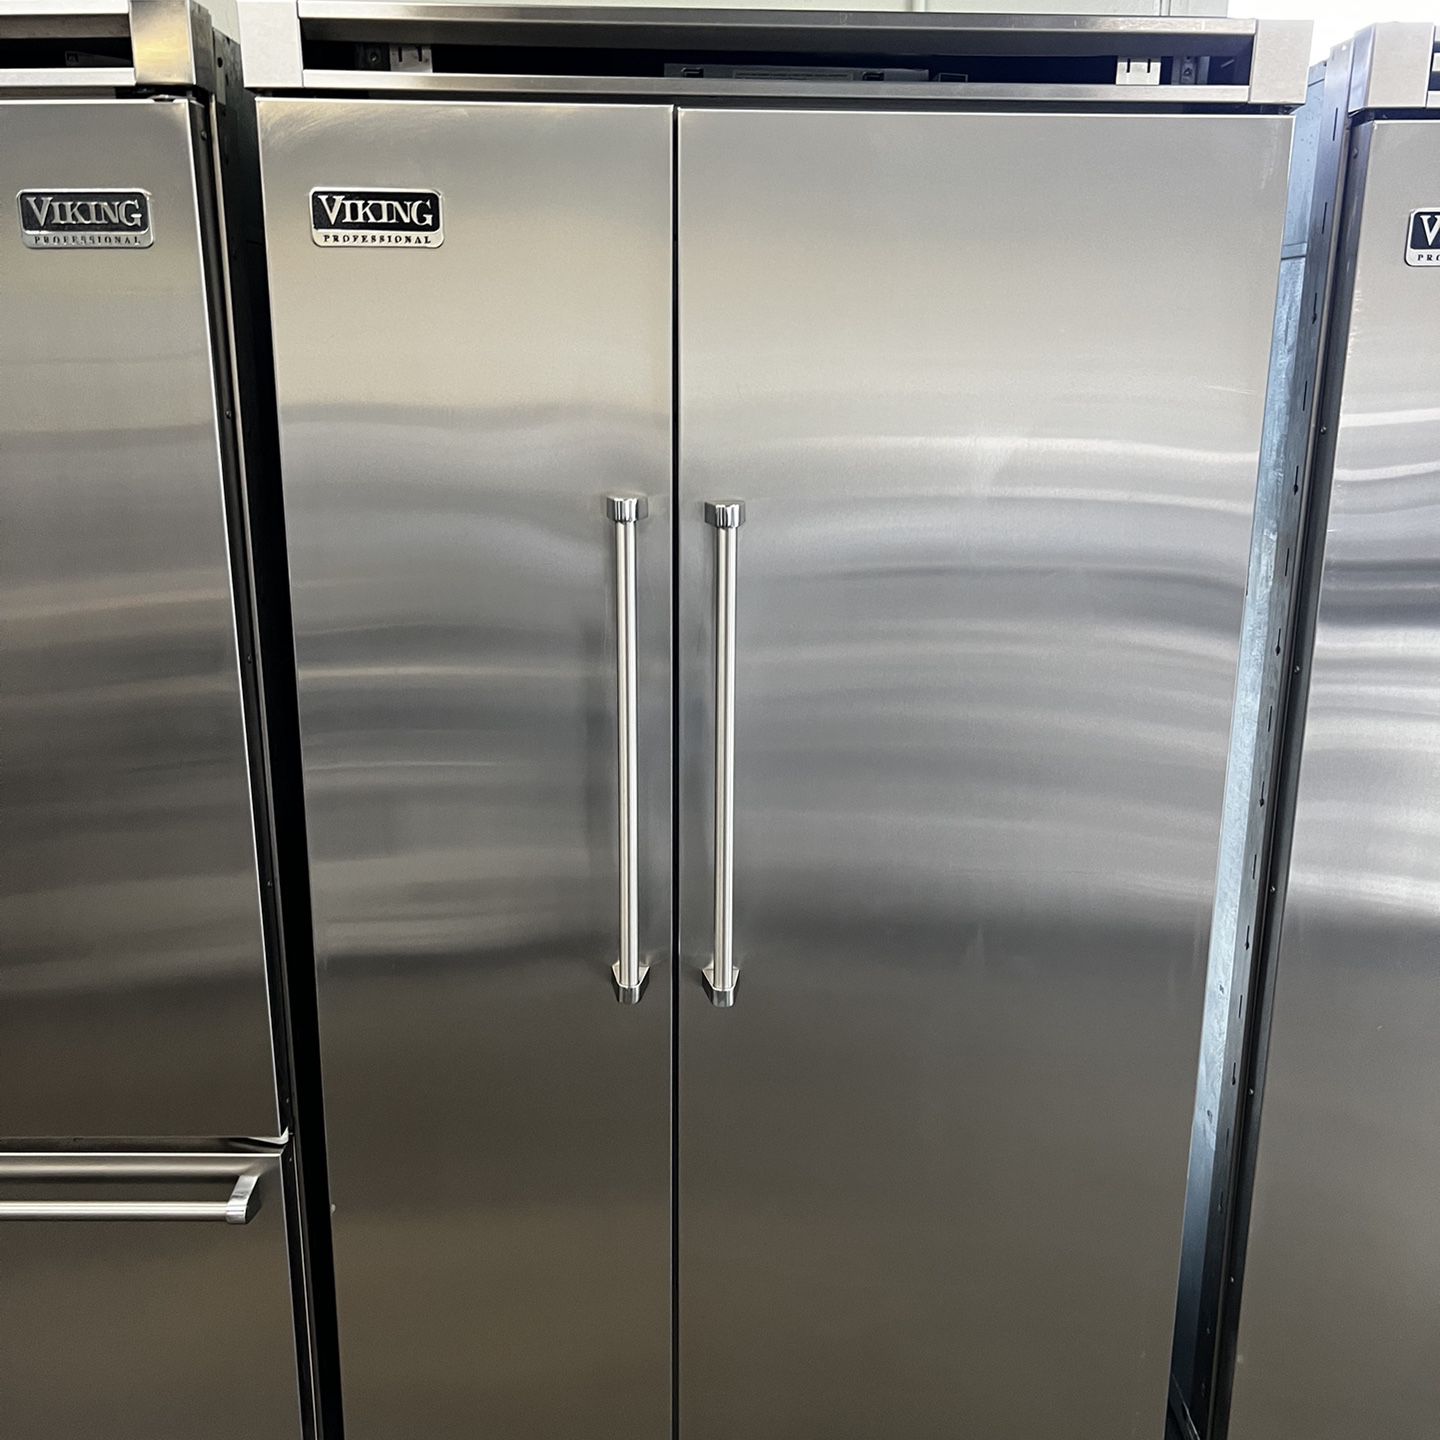 Viking 48”Wide Stainless Steel Built In Refrigerator Side By Side 